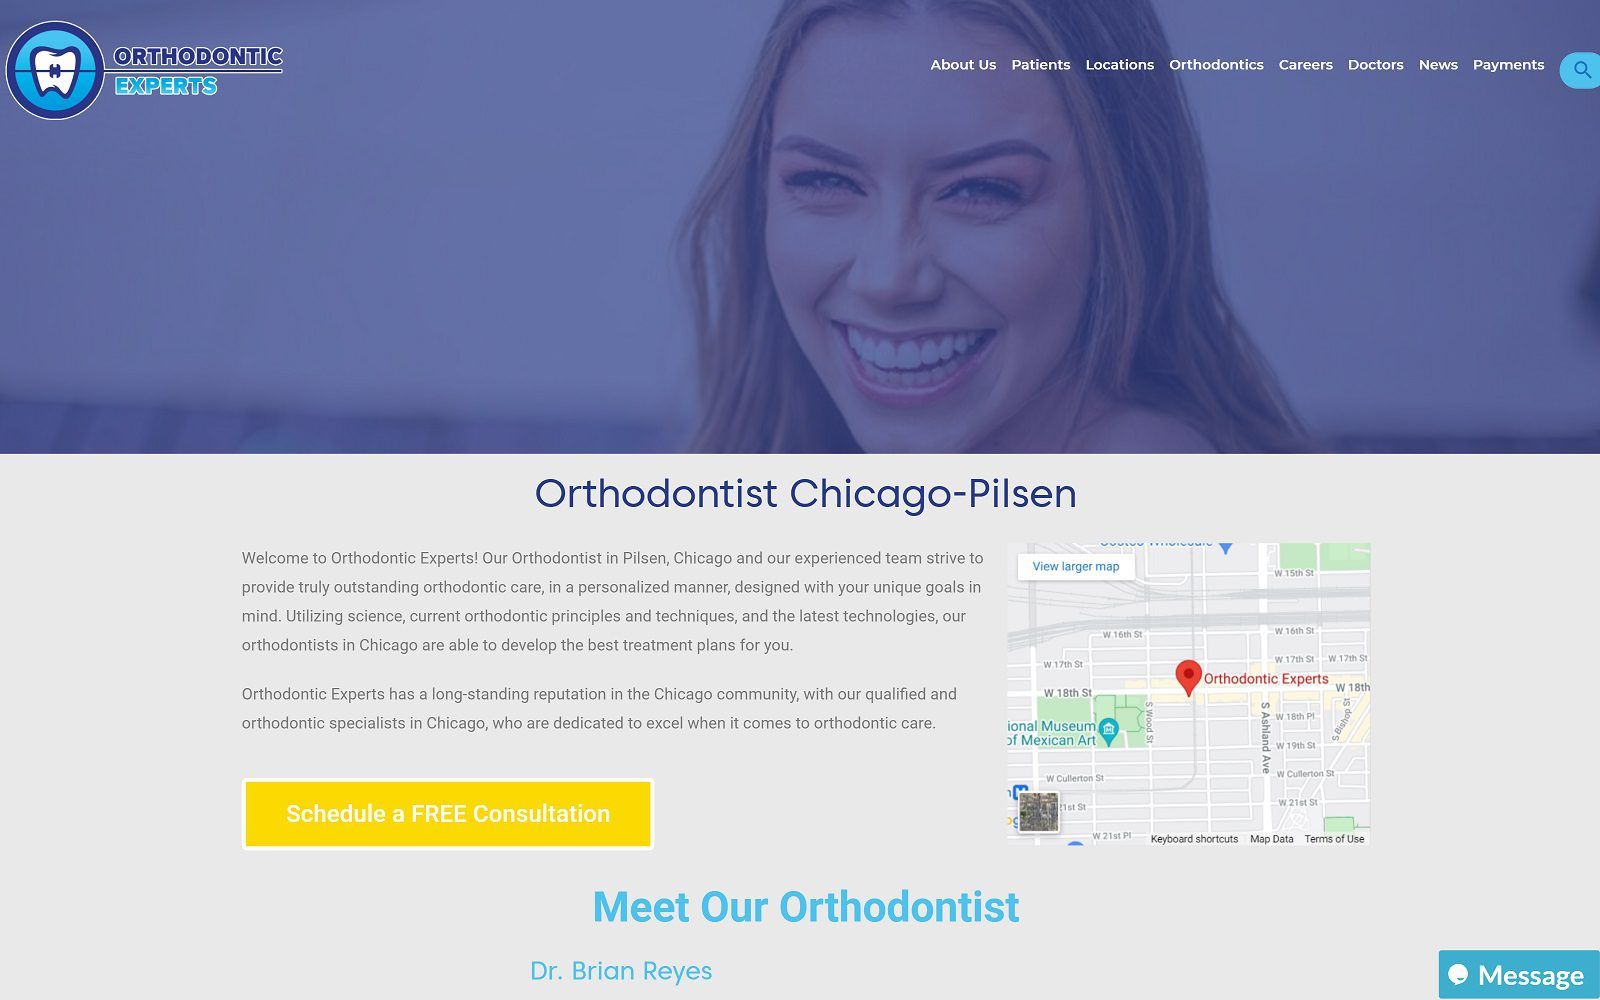 The screenshot of orthodontic experts website